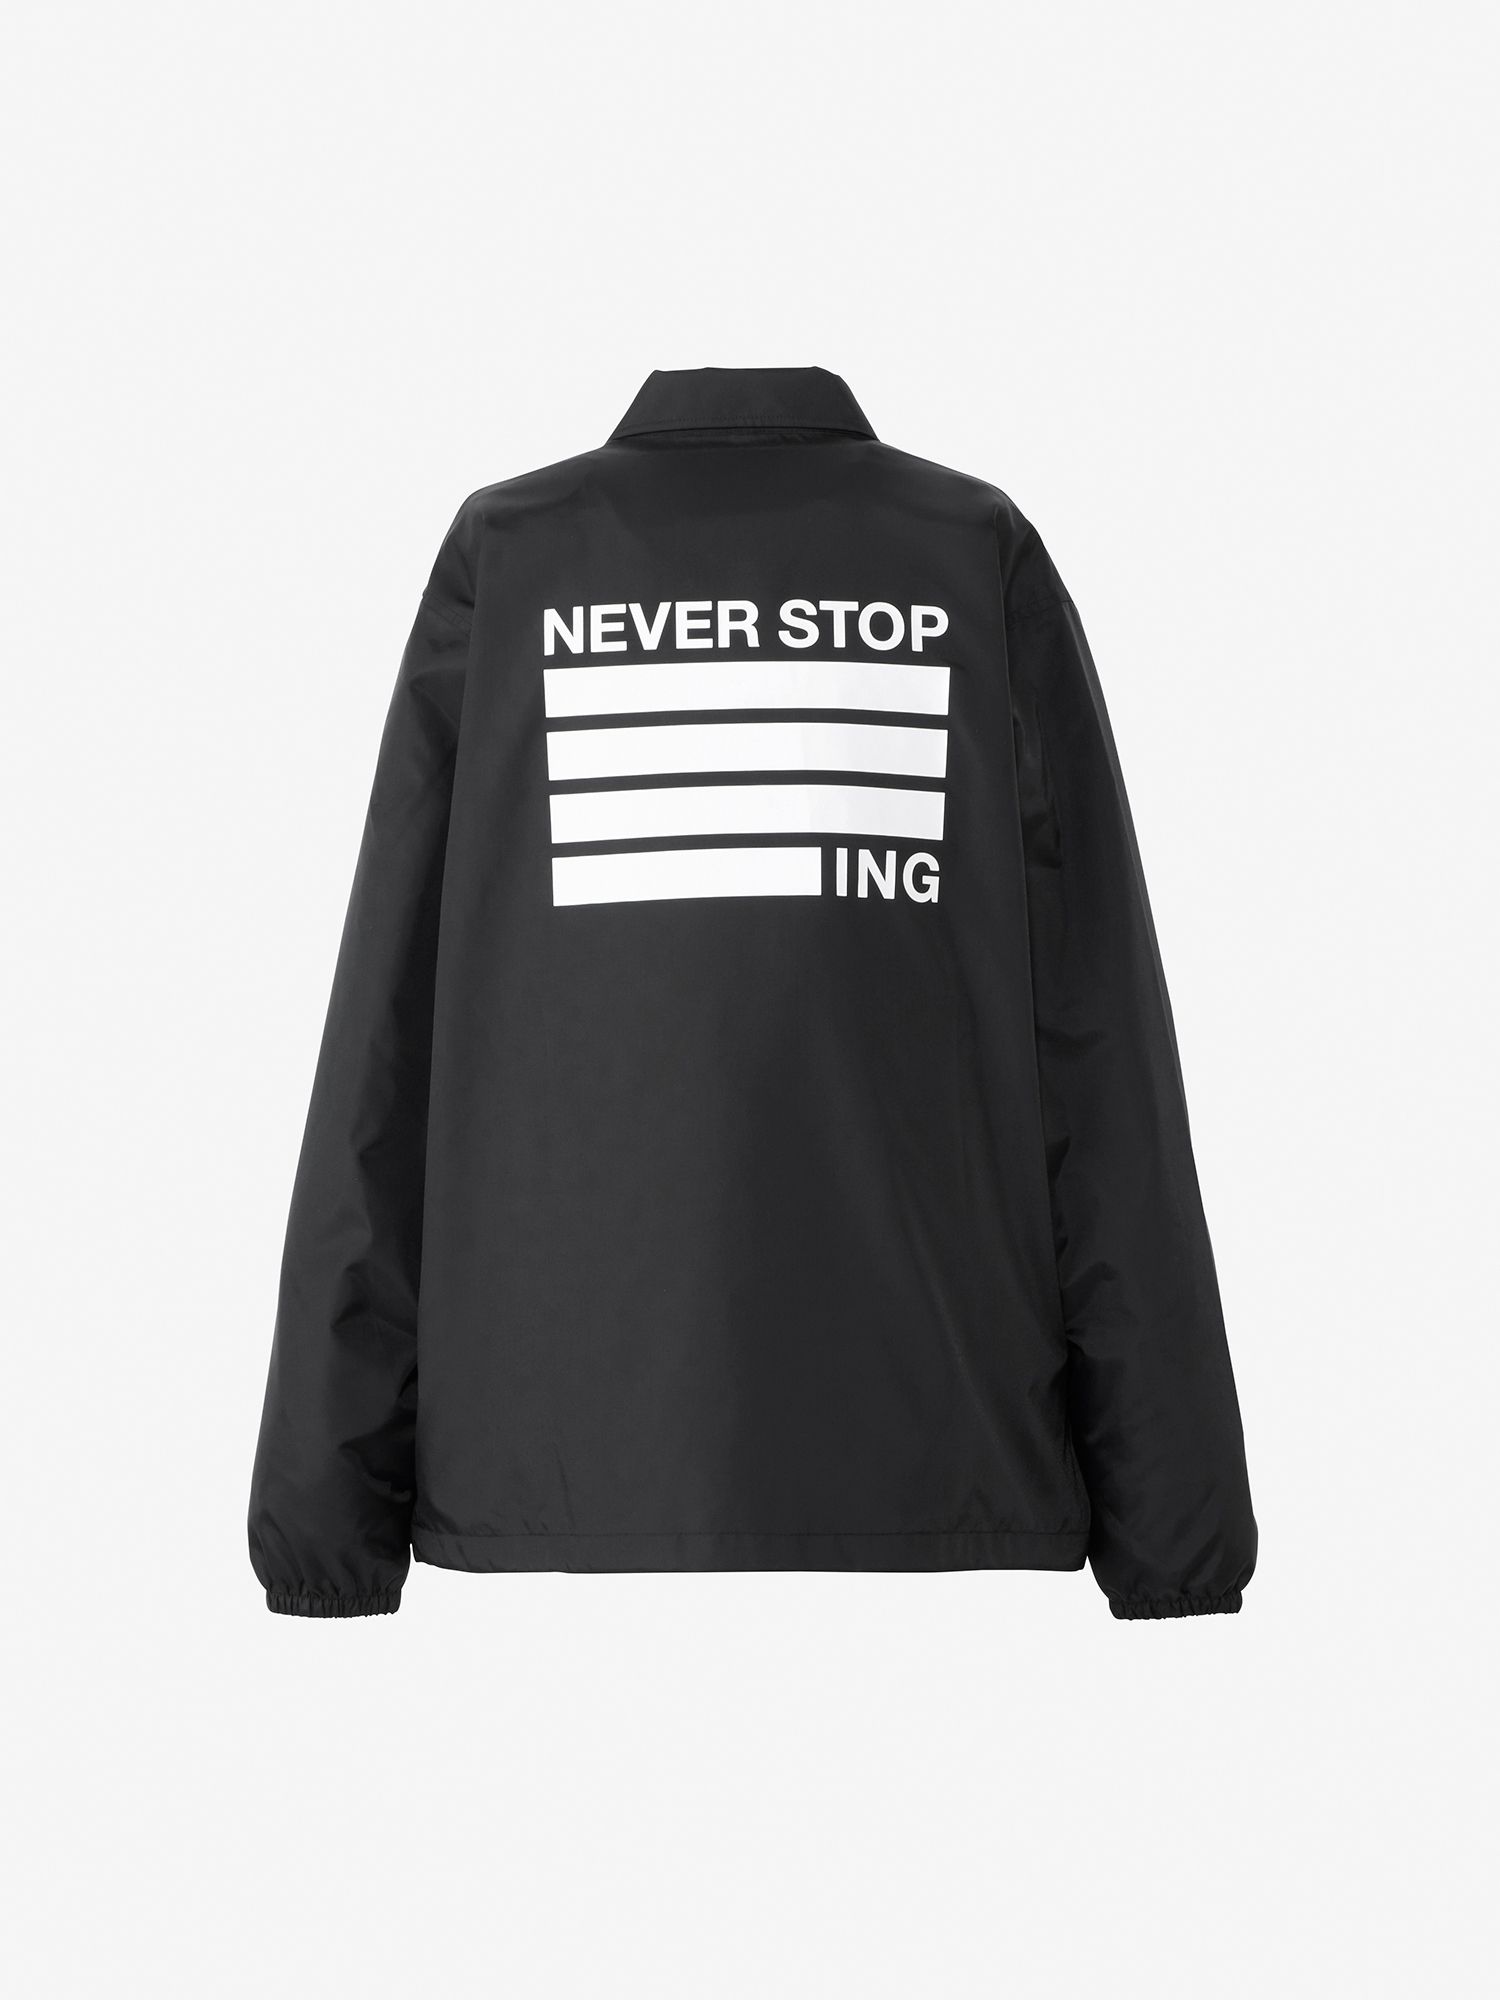 THE NORTH FACE ザ ノースフェイス NEVER STOP ING The Coach Jacket